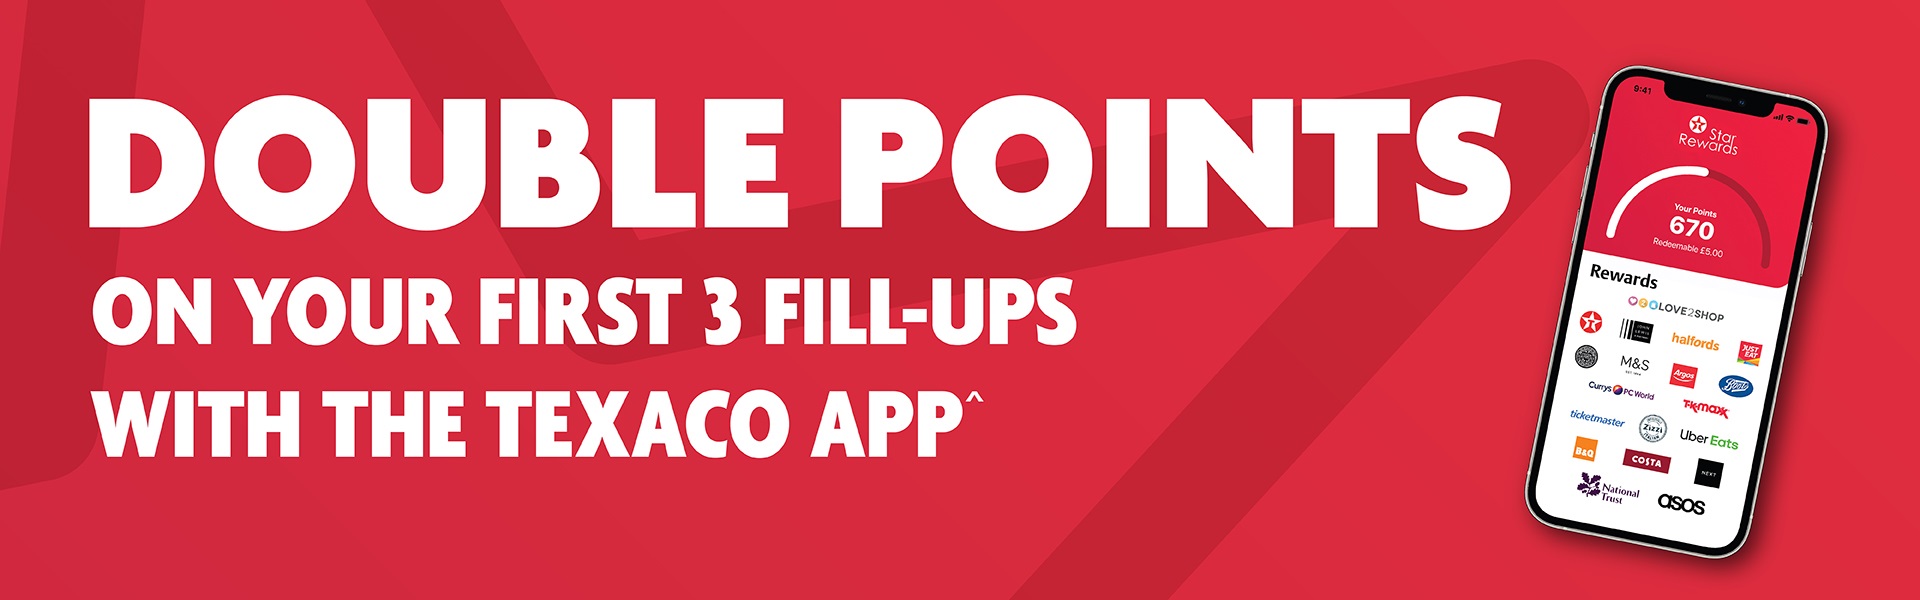 Save on fuel with the Texaco app. 200 points when you download and register*